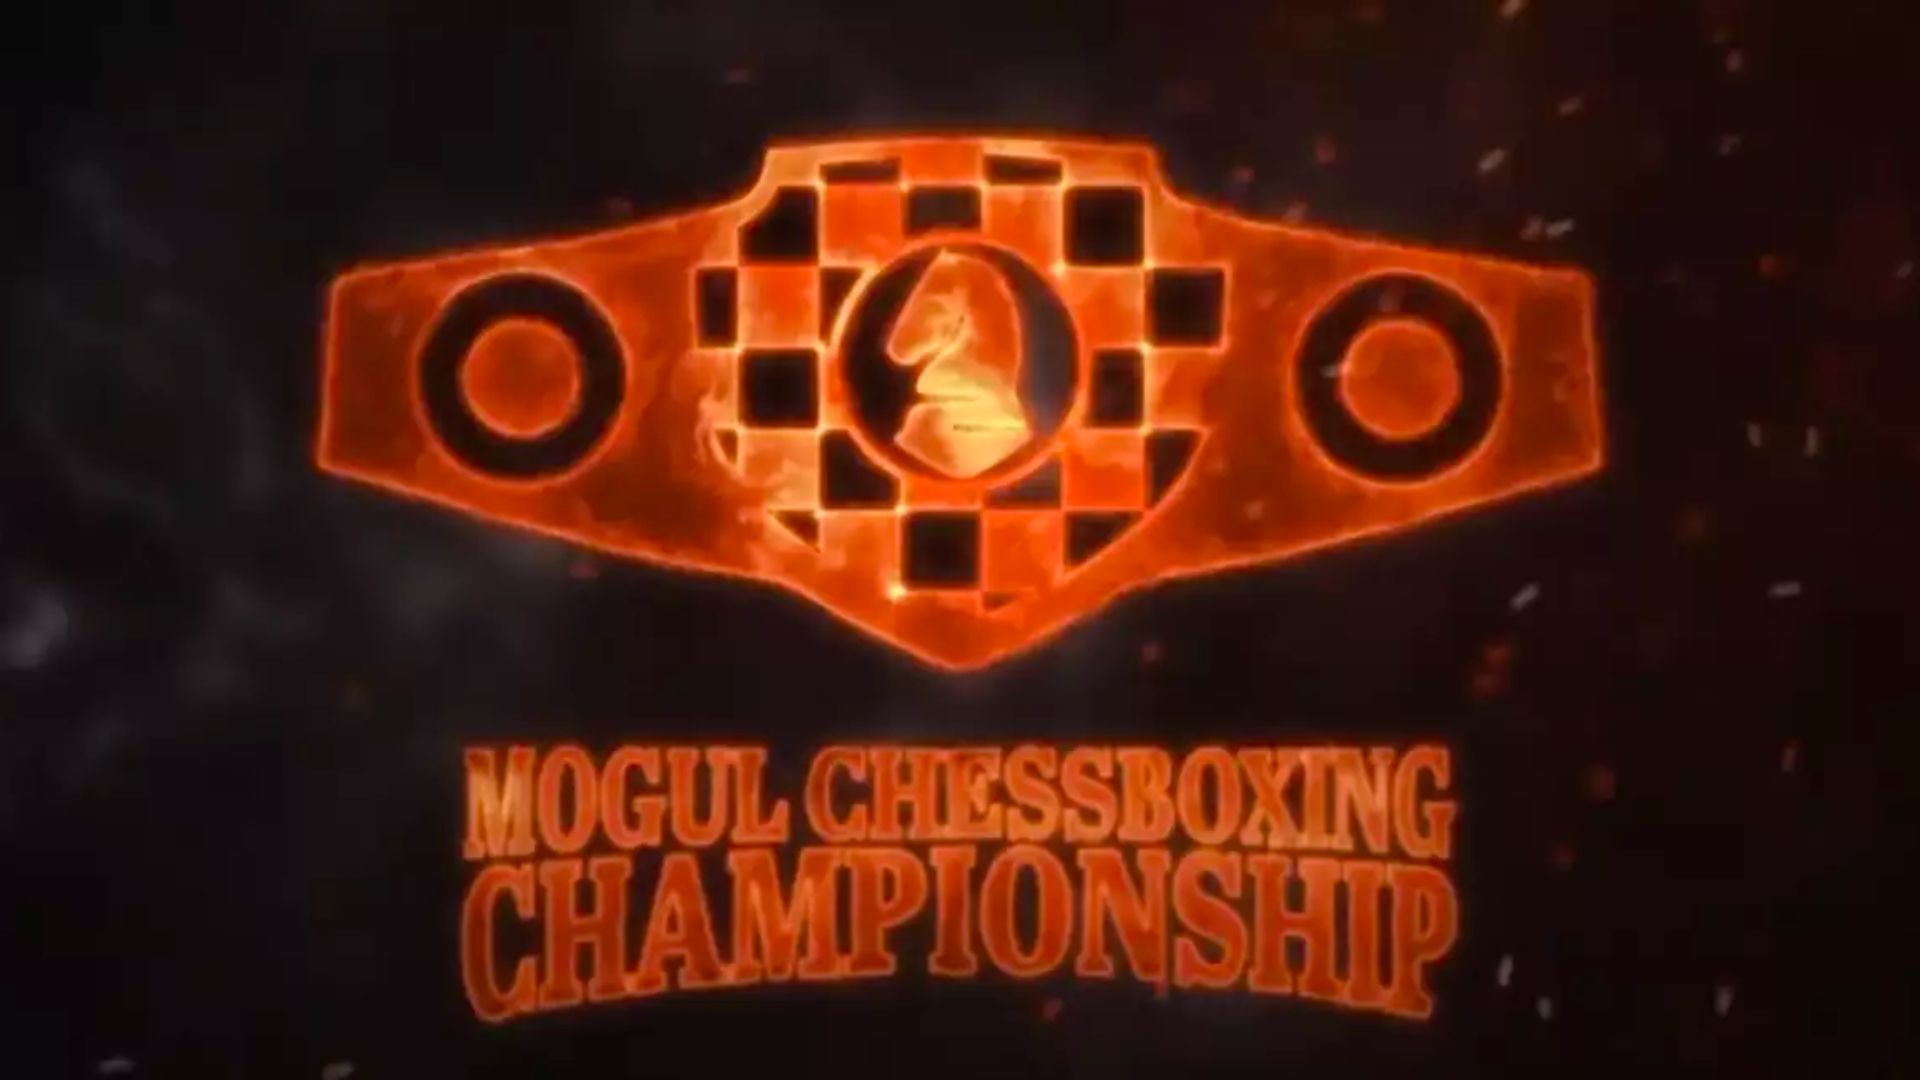 Ludwig's Mogul Chessboxing Championship event: full results, card and more Dexerto